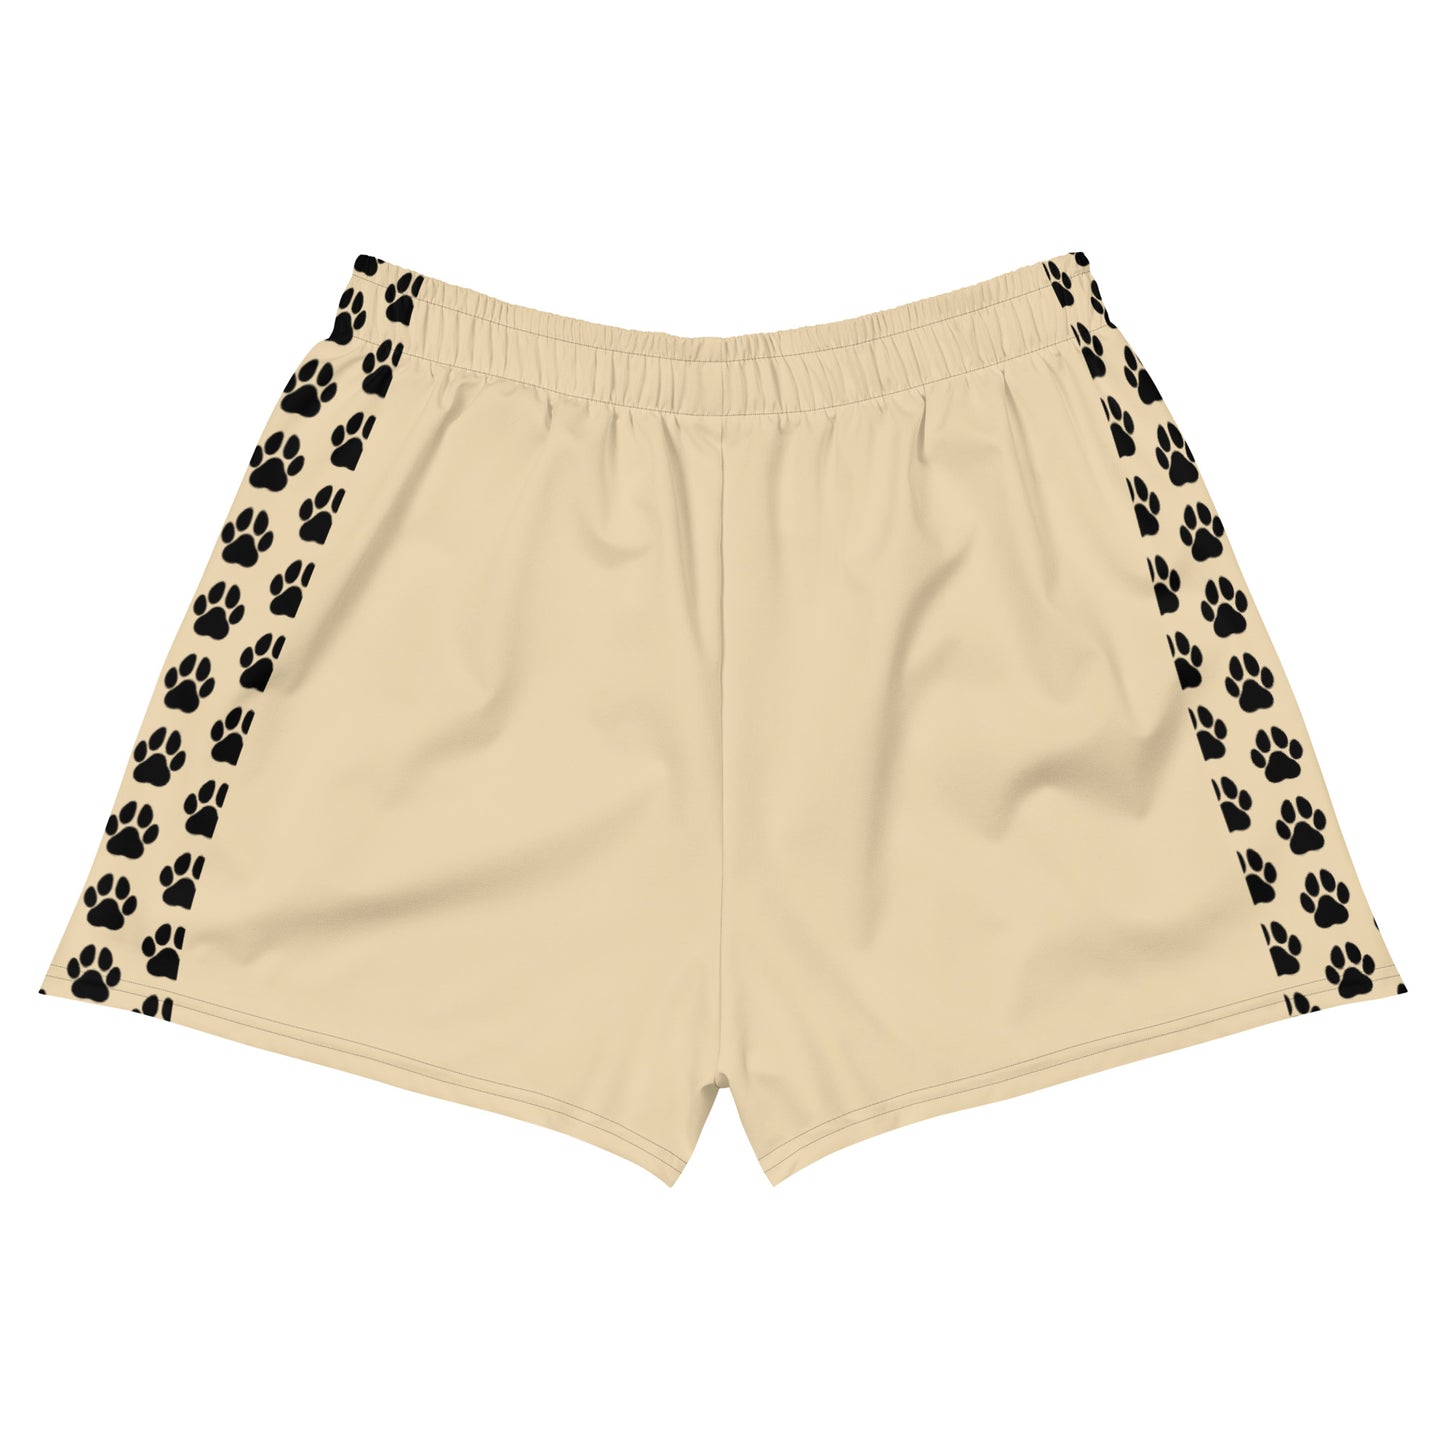 Beige'd Out Dawg Trax - Women’s Athletic Shorts